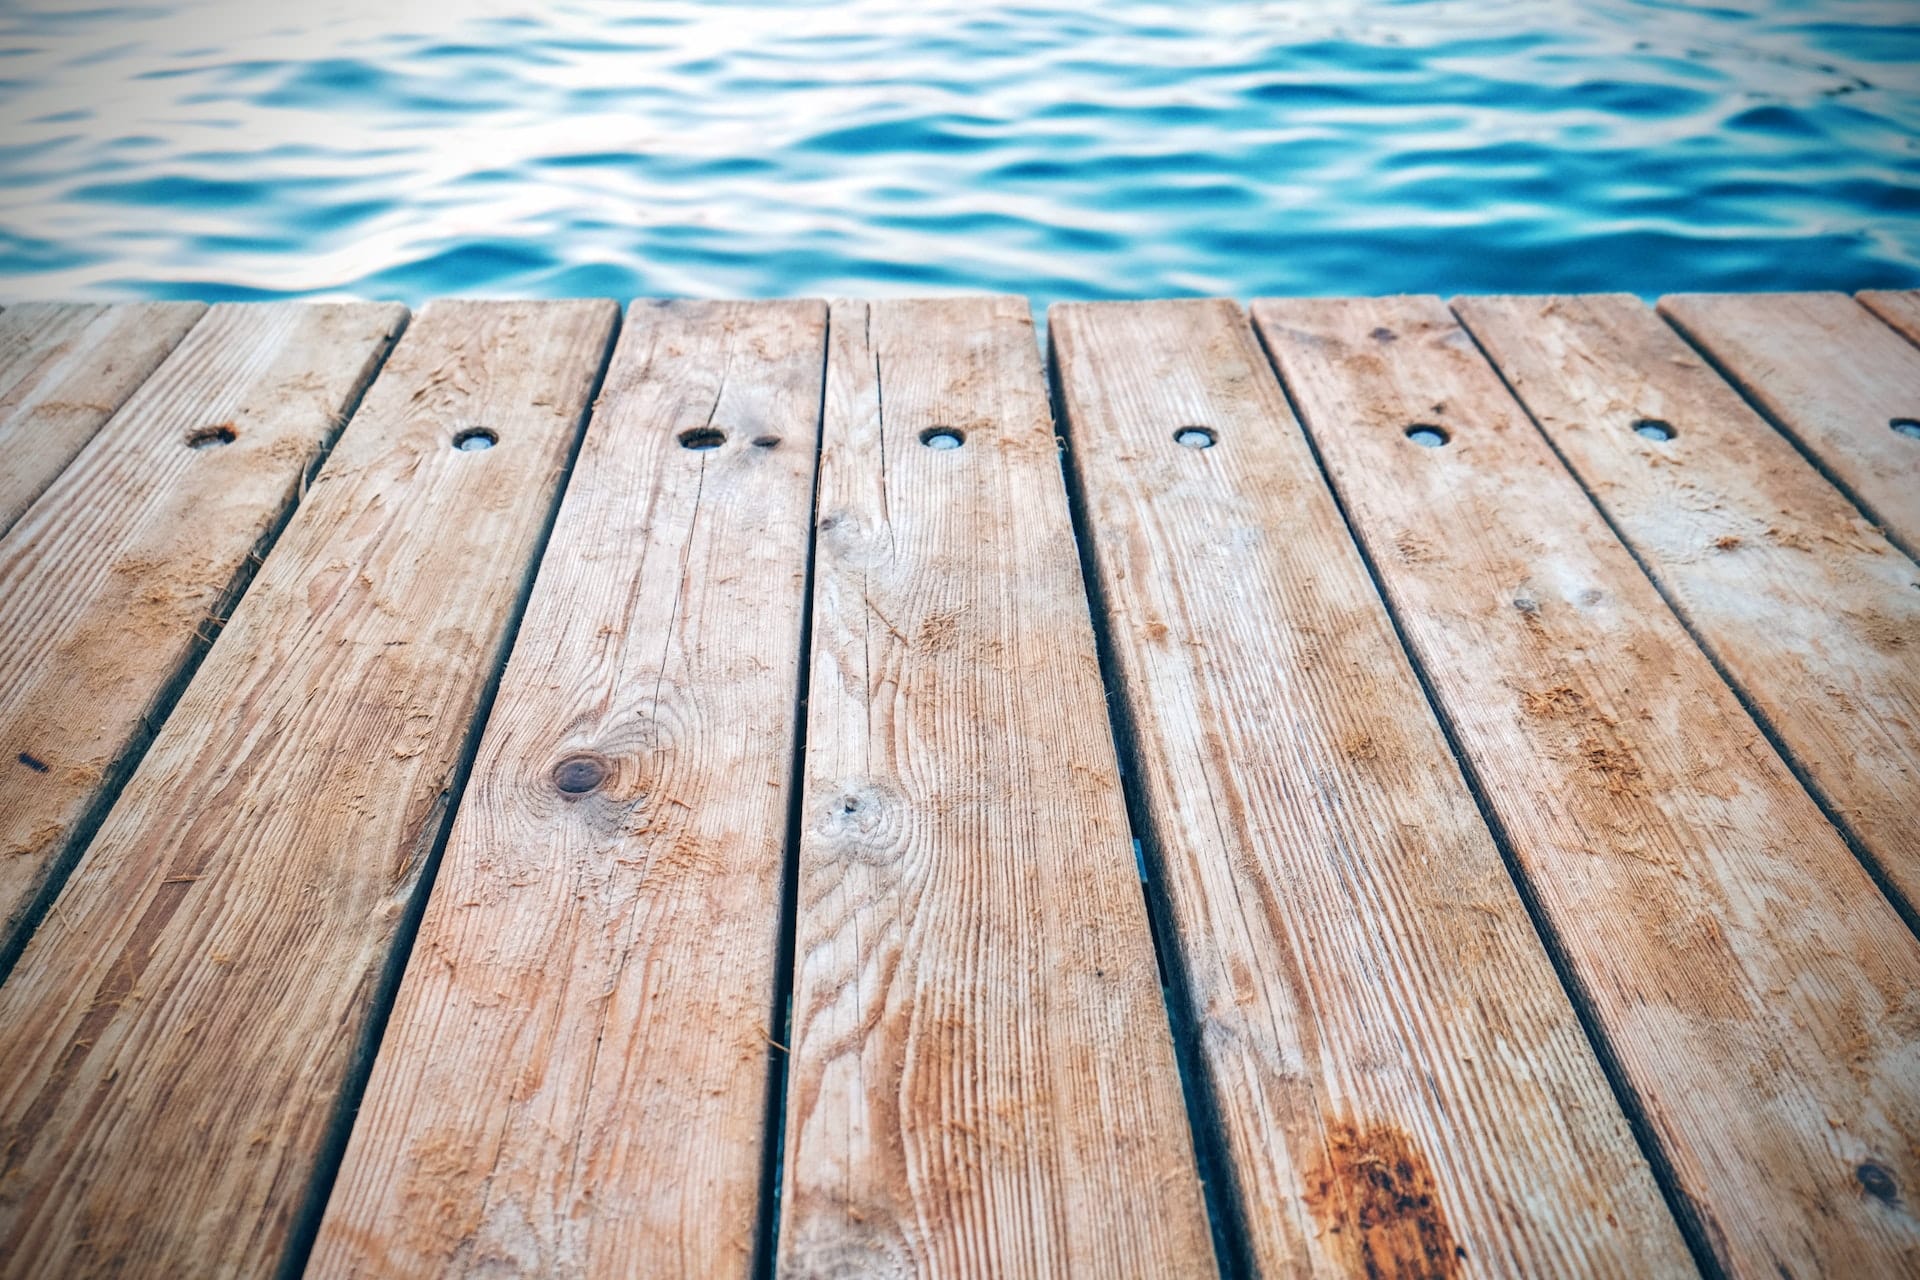 Lifespan of a Floating Dock